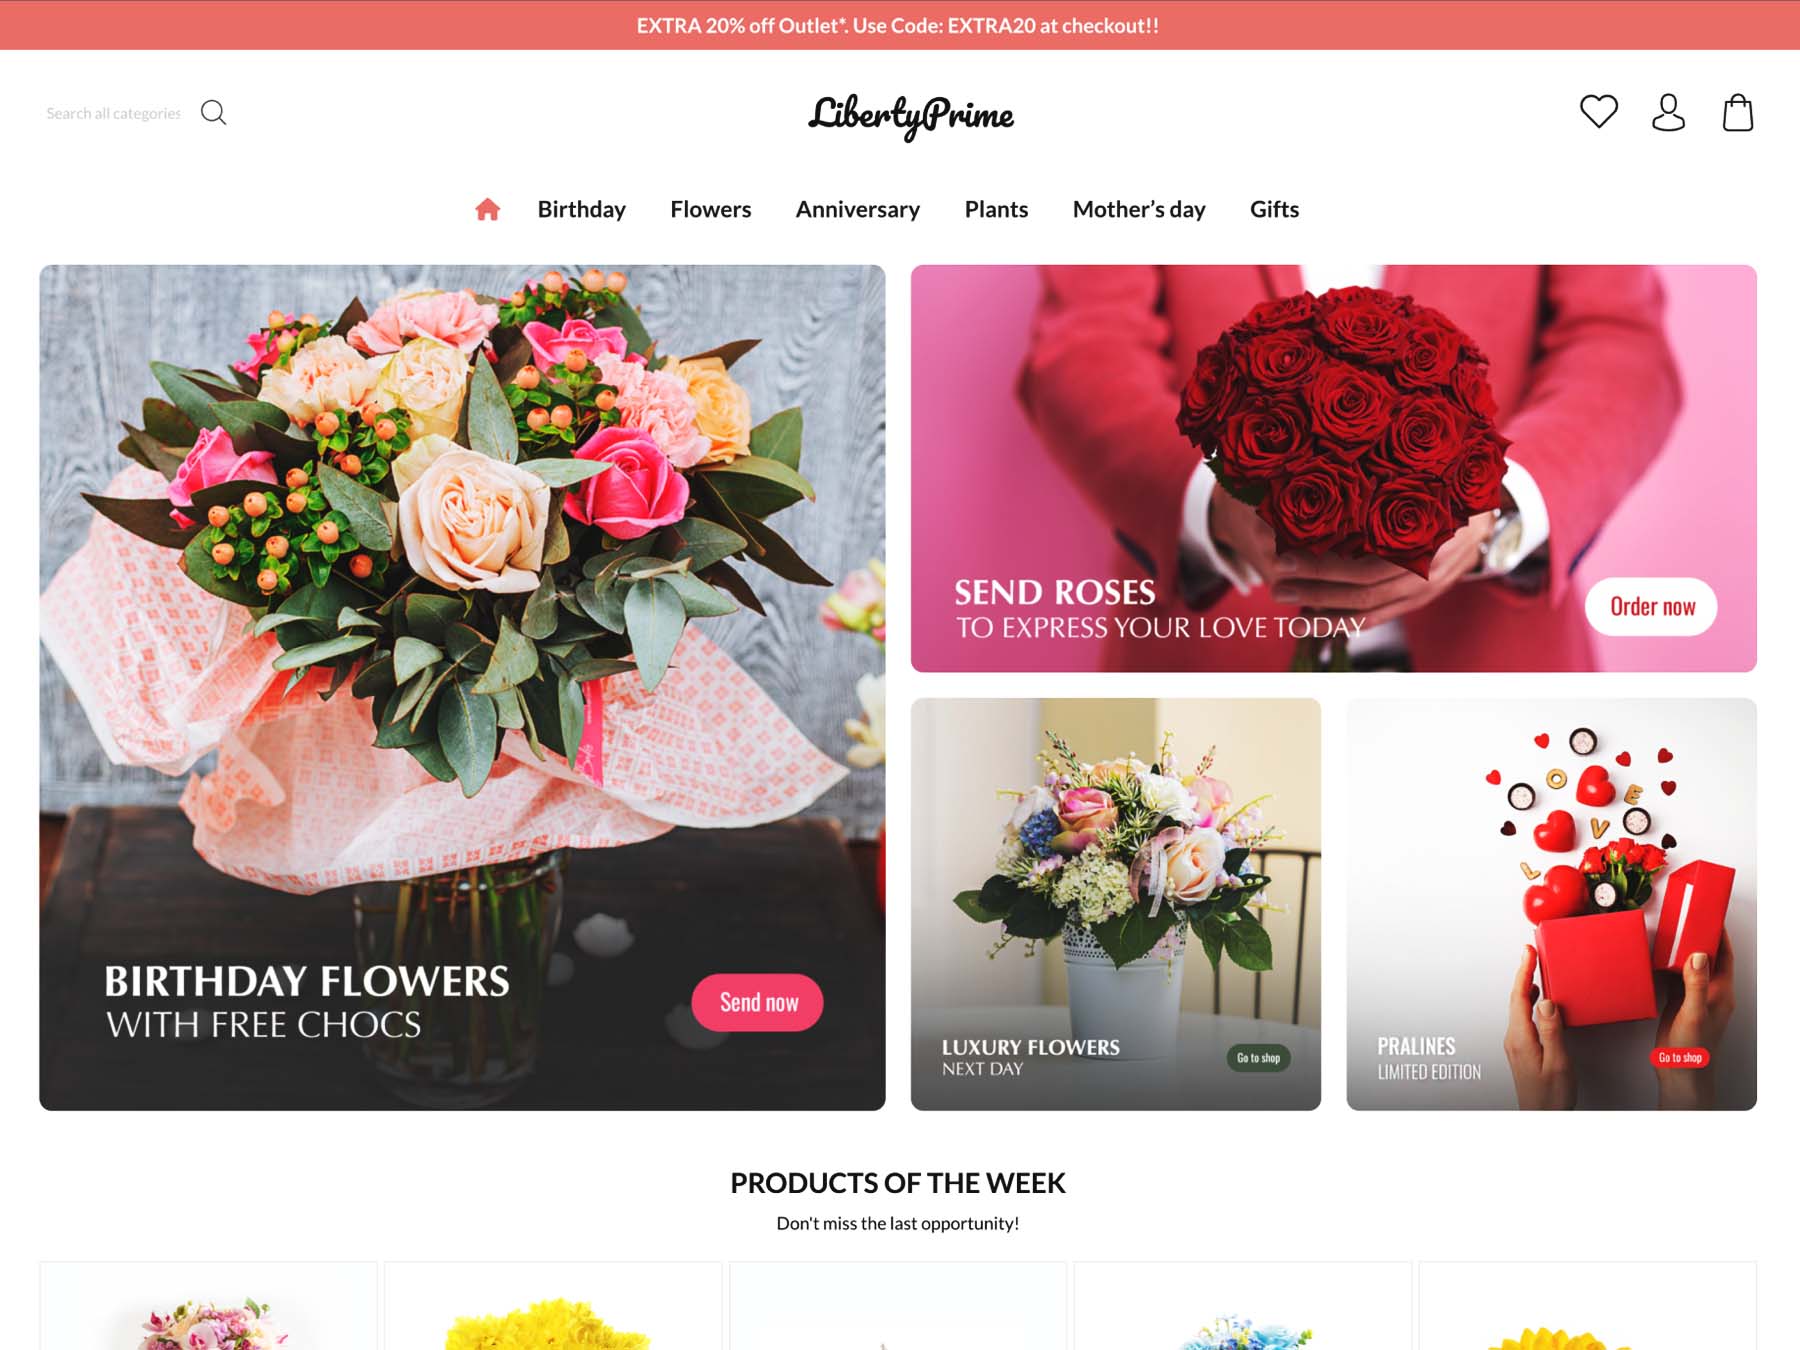 Liberty Prime Theme. An example of an online flower and gift store.